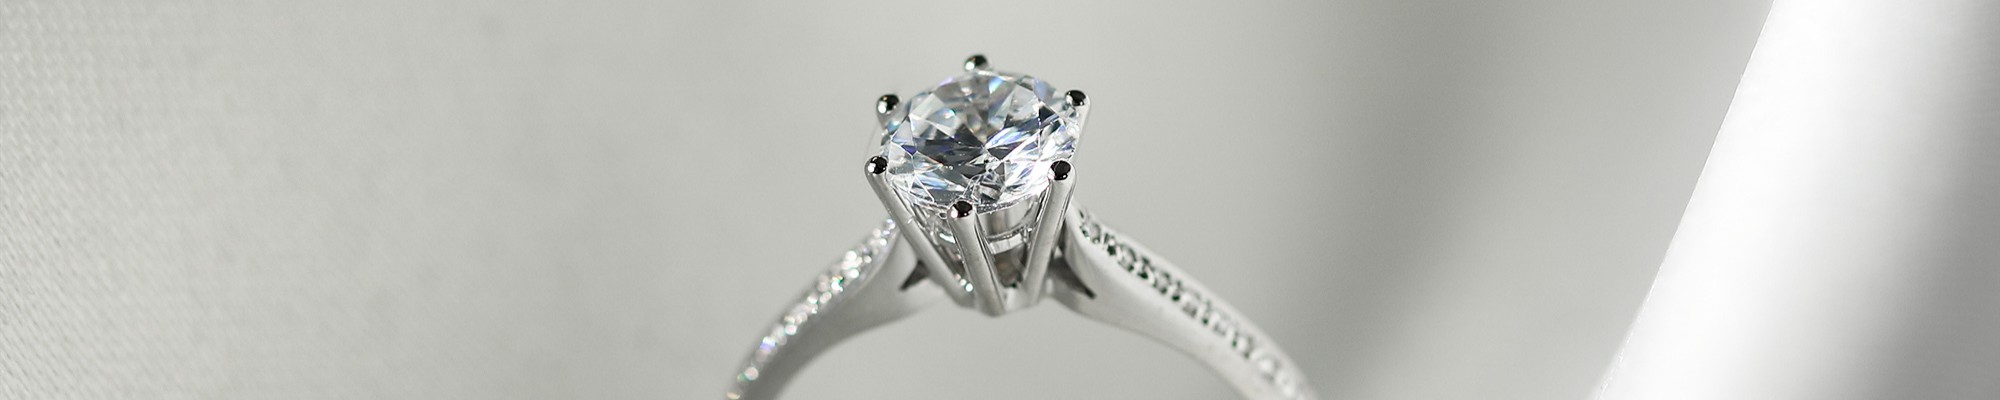 Engagement ring ideas for the ideal ring